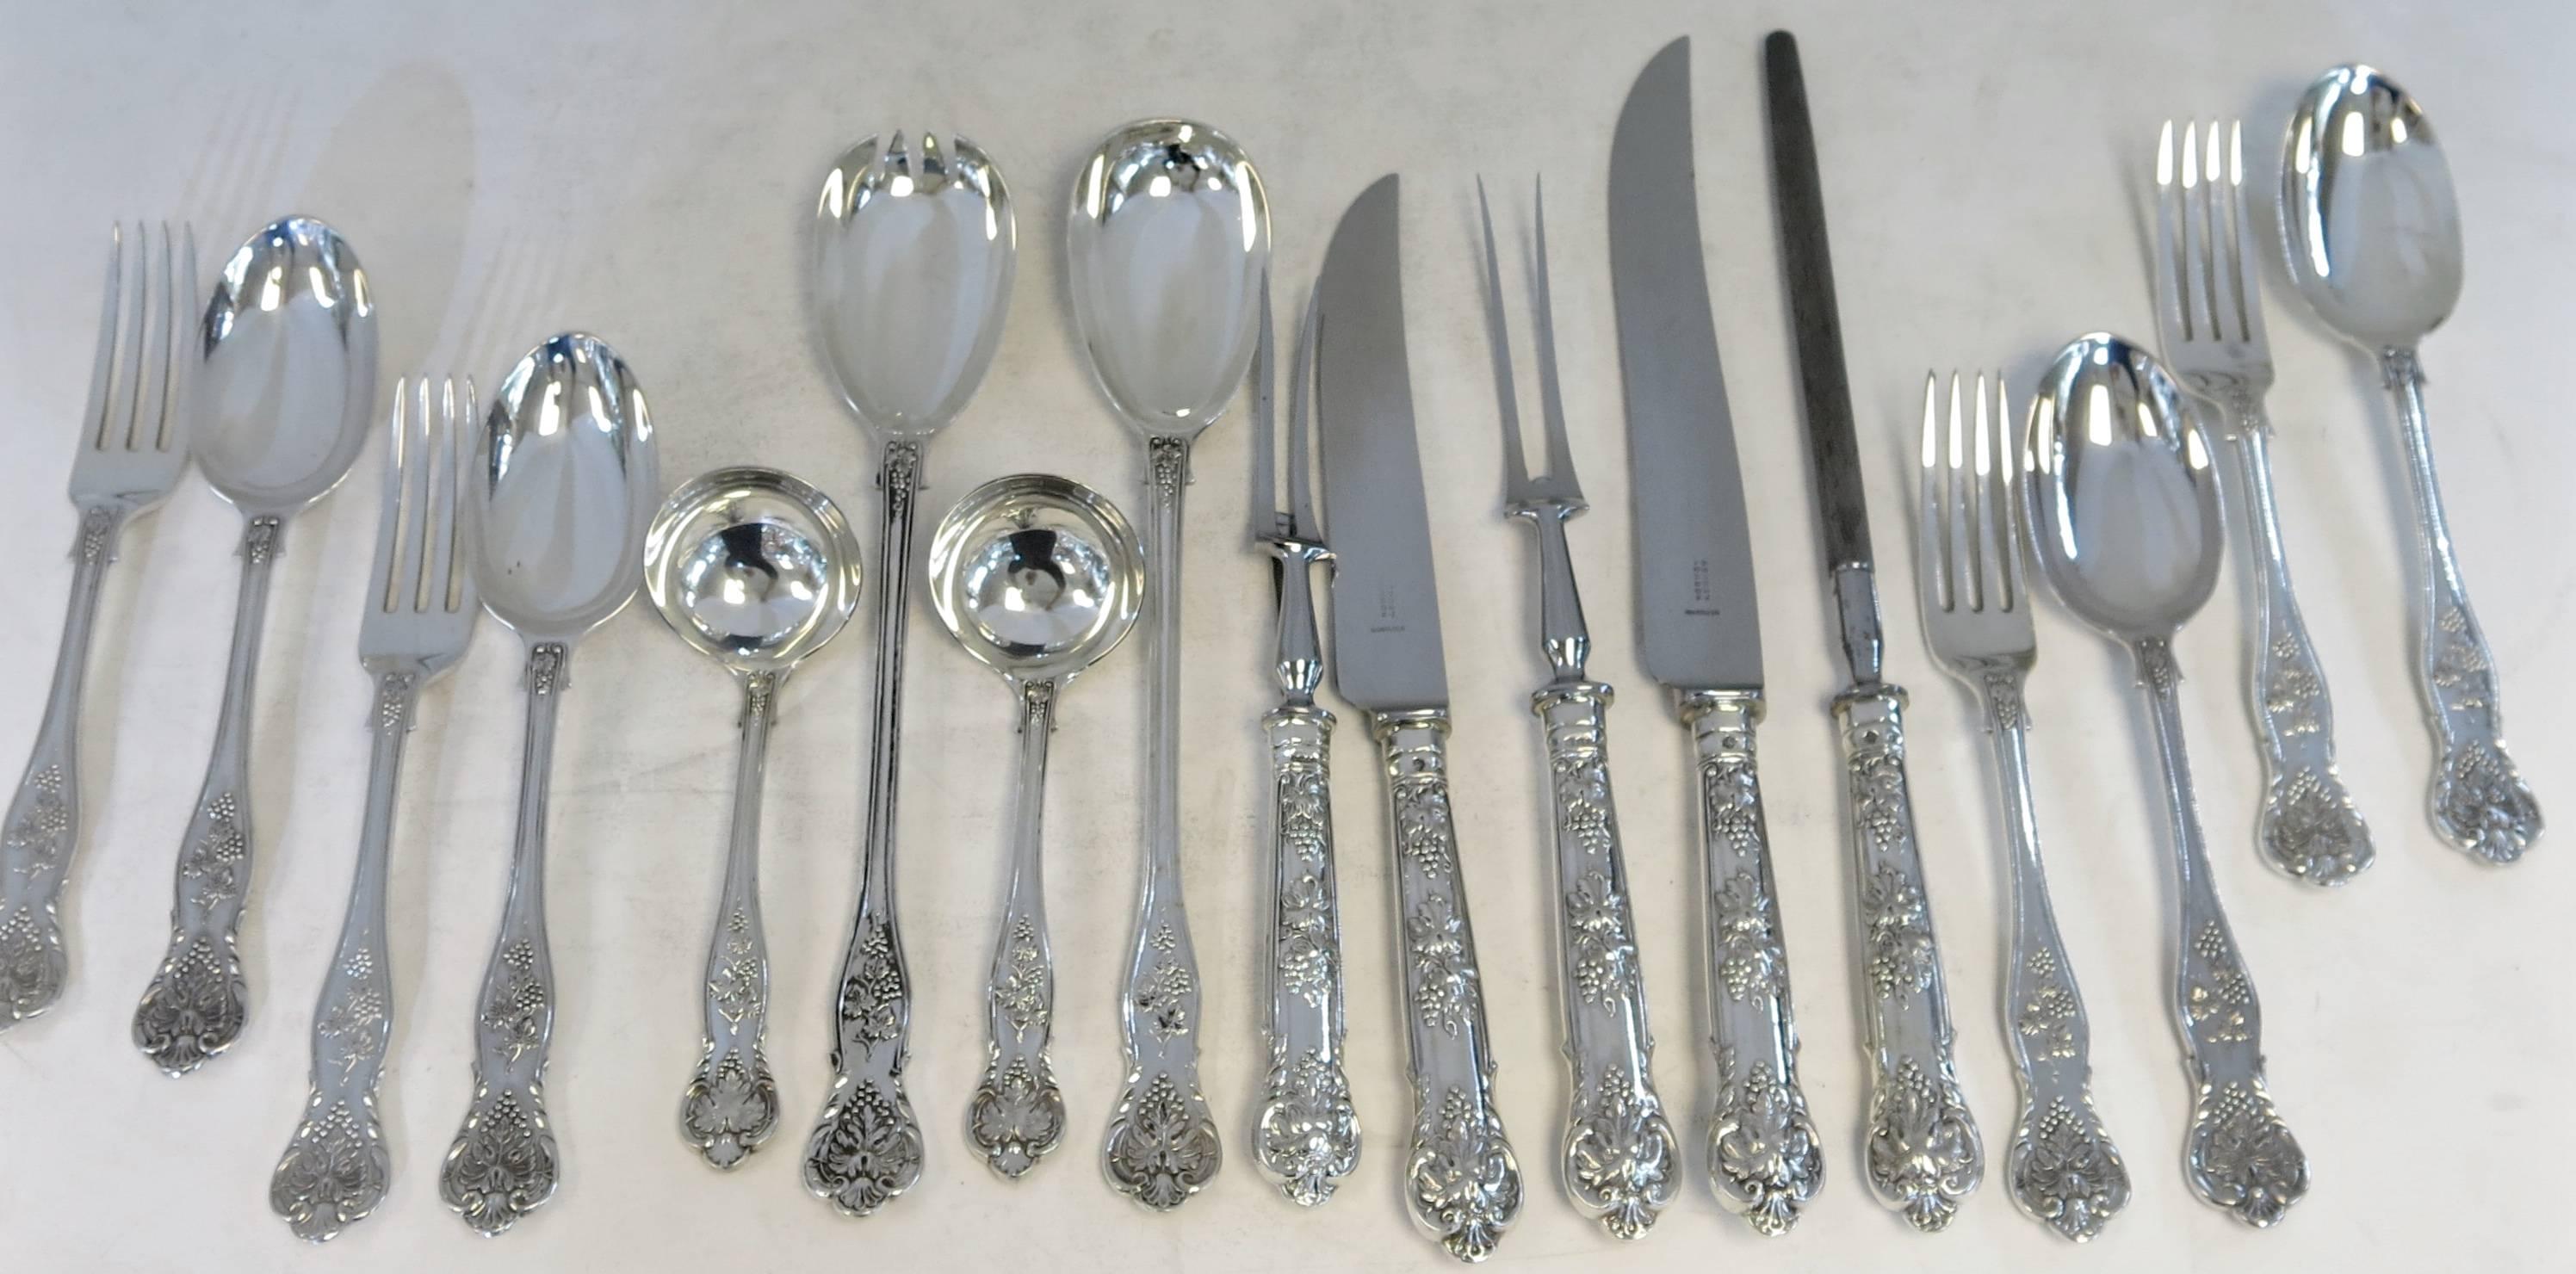 20th Century Rare, Trailing Vine, Sterling Silver Flatware Set by Asprey & Co. 161 Pieces For Sale